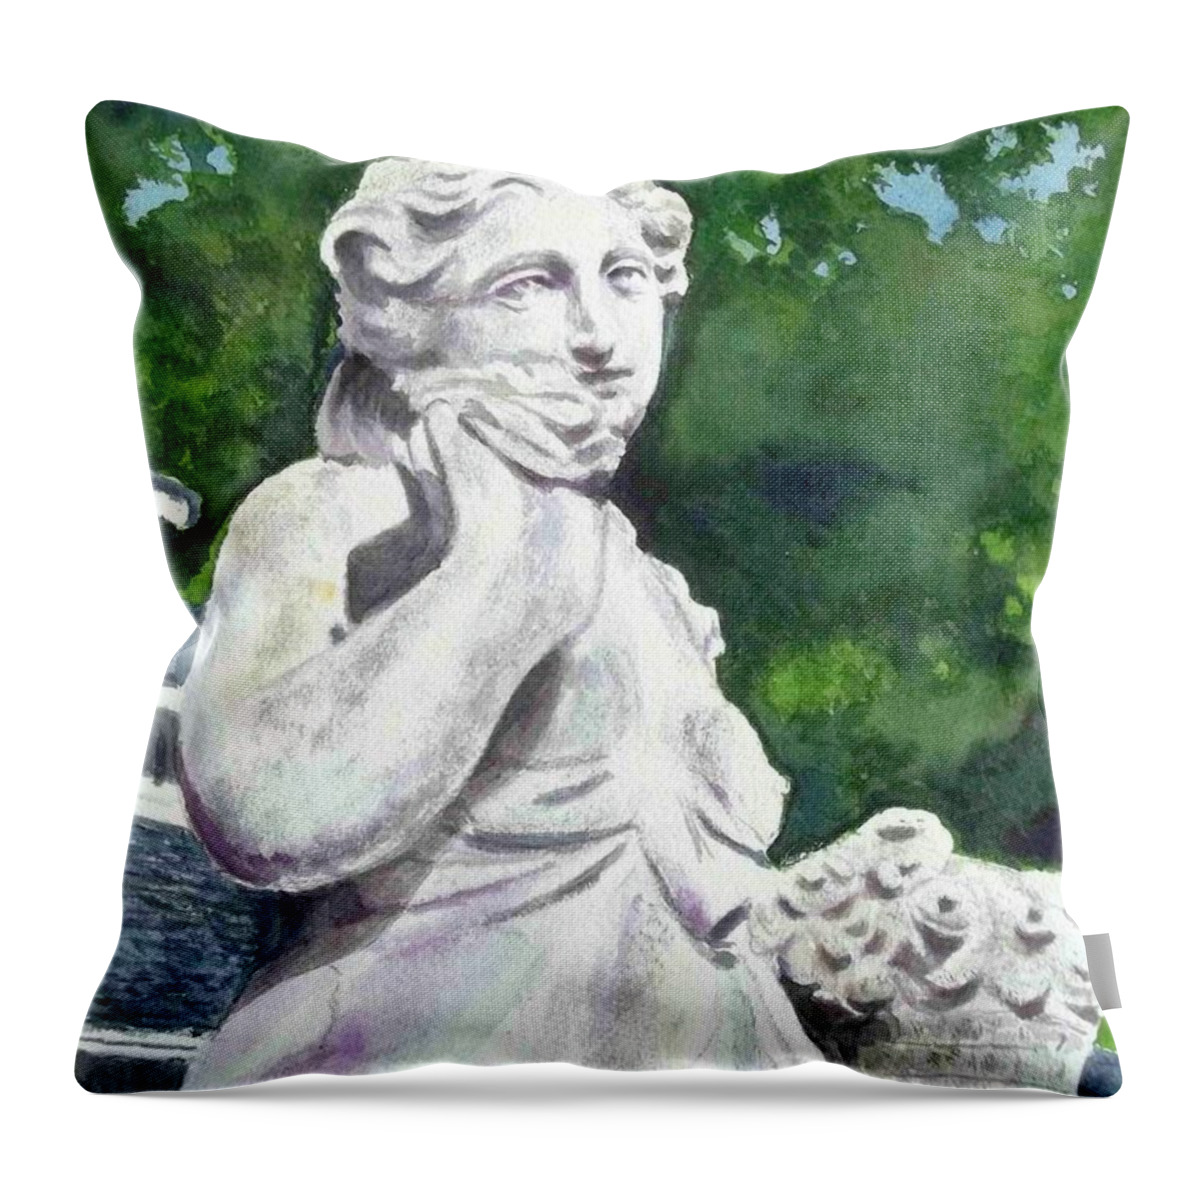  Statue Throw Pillow featuring the painting A Statue At The Wellers Carriage House -1 by Yoshiko Mishina